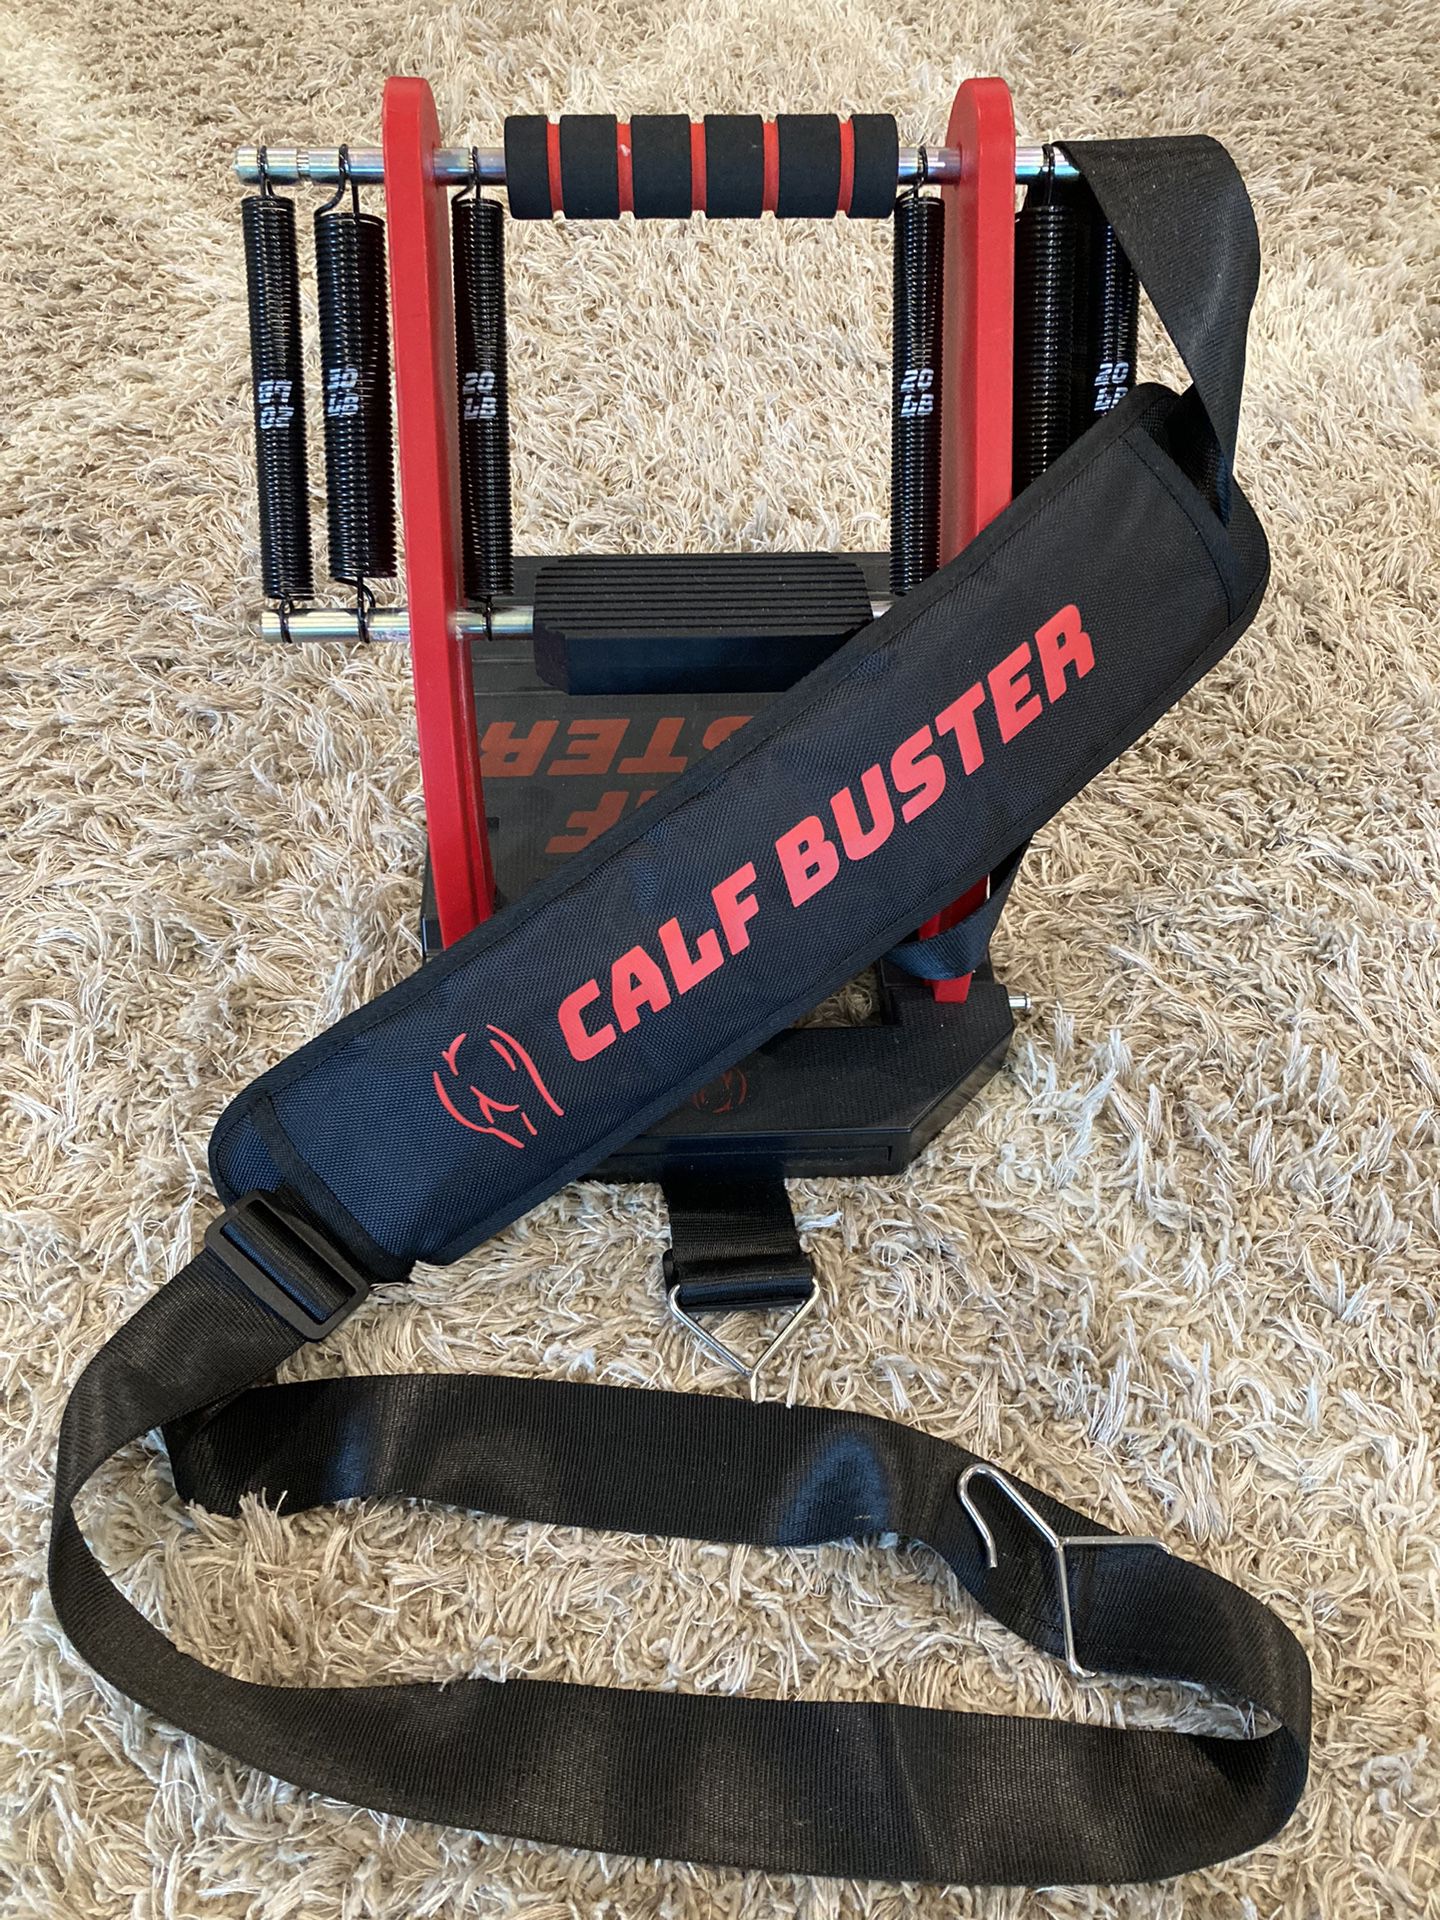 Calf Buster Extension Machine